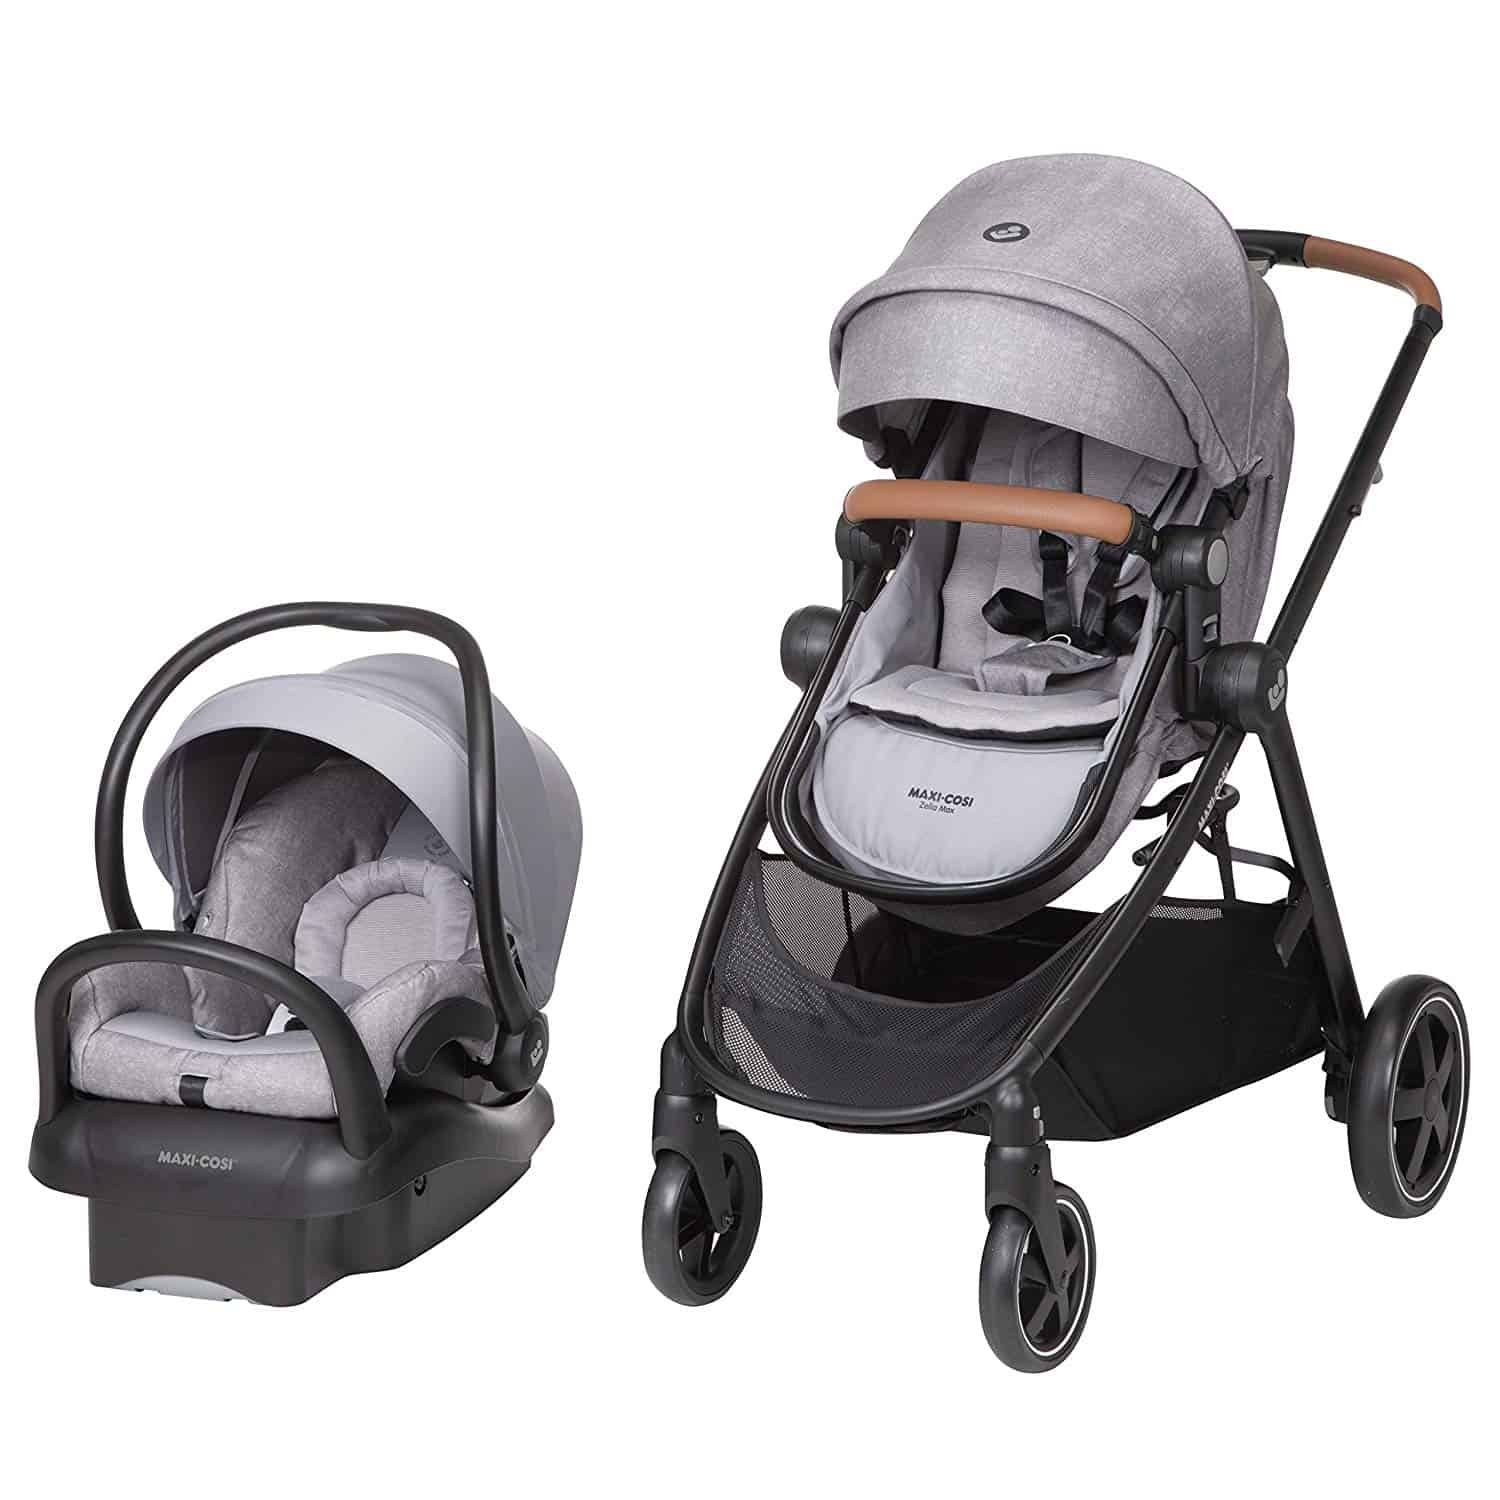 Stroller brand review: Maxi Cosi - Baby Bargains